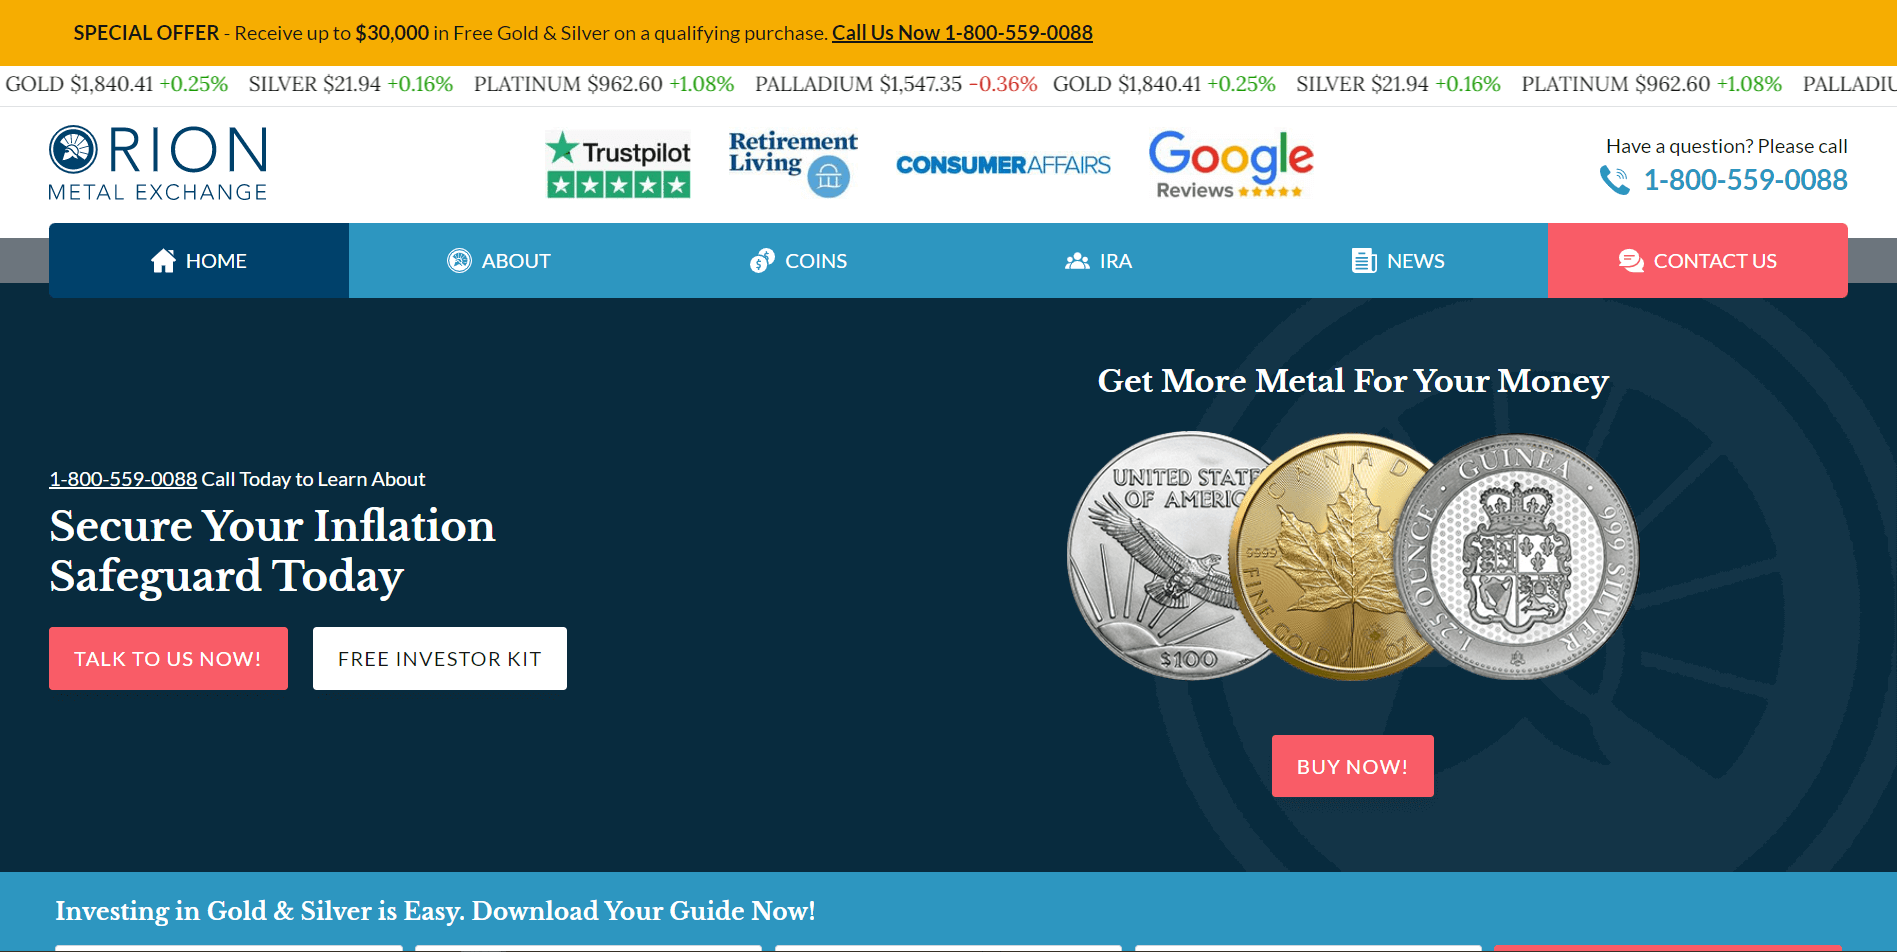 orion metal exchange gold ira review homepage